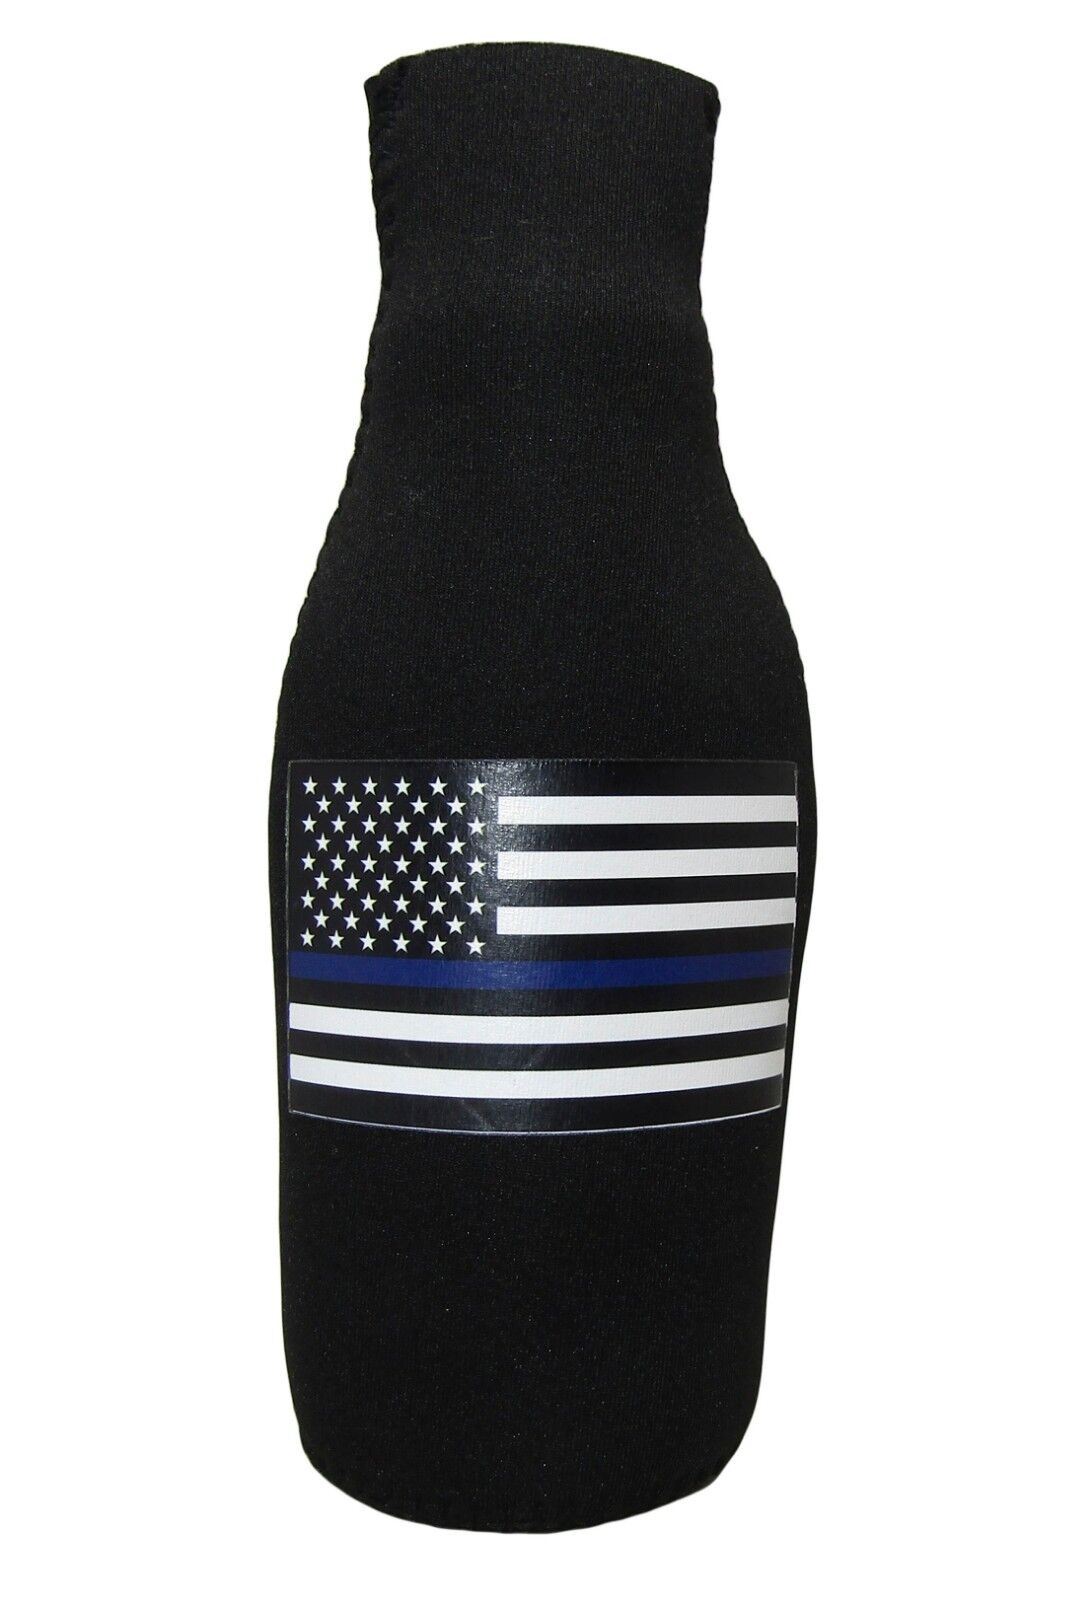 USA Thin Blue Line Police Law Collapsible Insulated Printed Bottle Jacket 